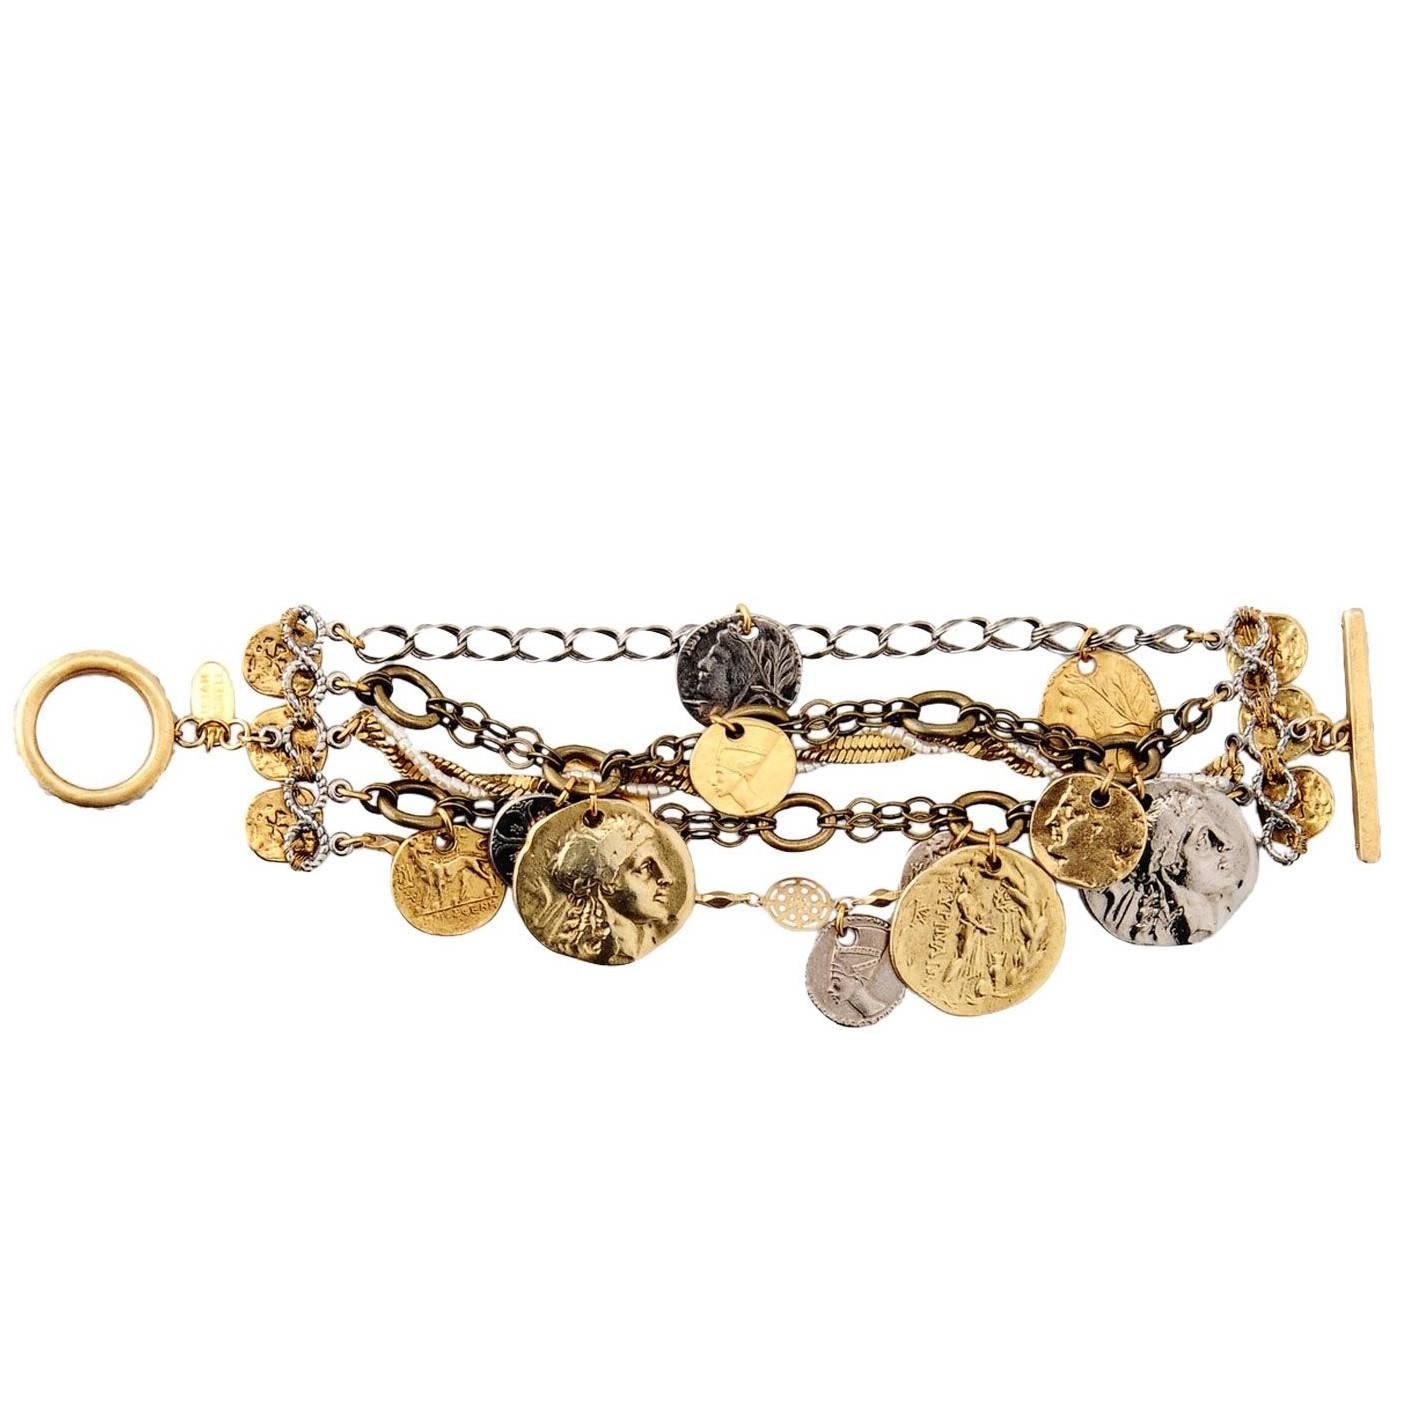 Miriam Haskell Mixed Media Gold Silver Metal Coin Medalion Chain Charm Bracelet